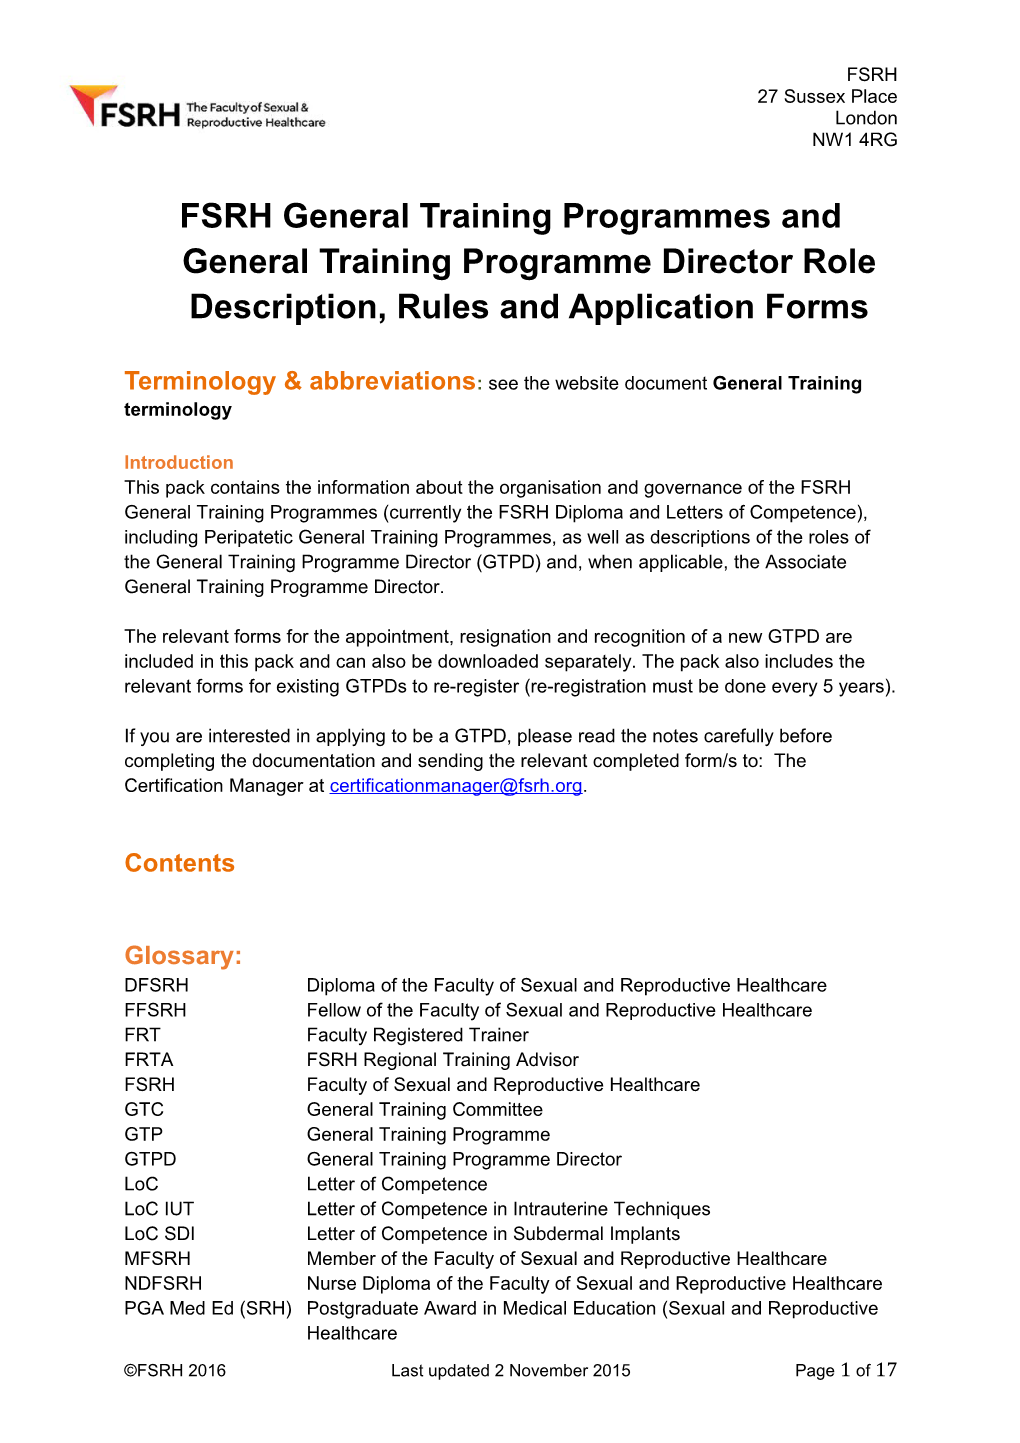 Terminology & Abbreviations : See the Website Document General Training Terminology